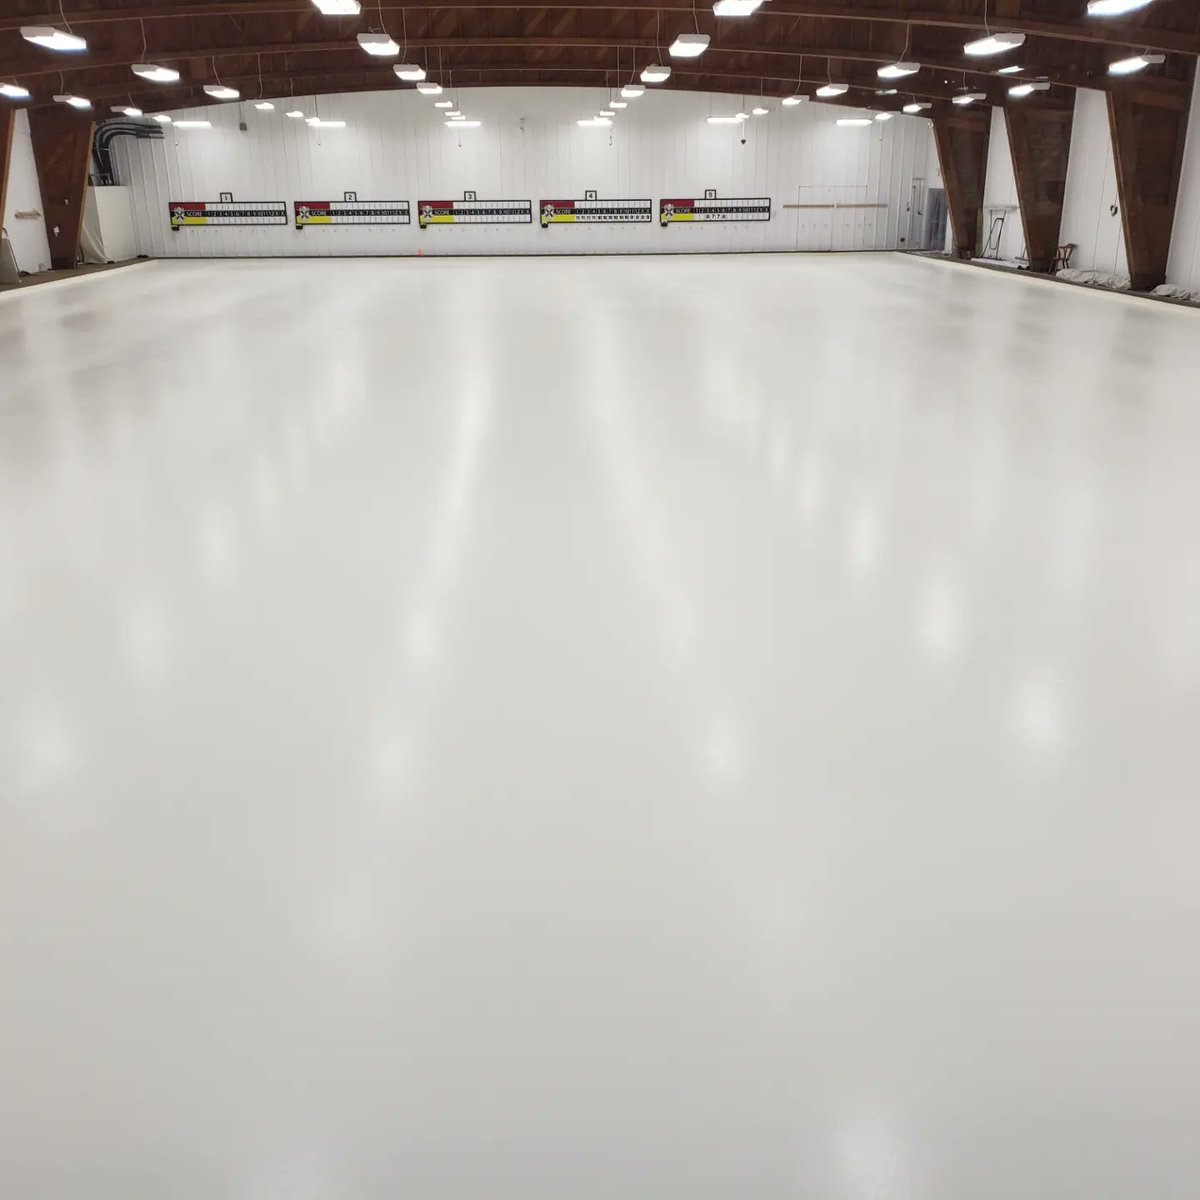 How my day started and how my day ended!
Thank You Erik and Seth from @jeticecurling for the amazing job of #bringingmyicetolife
Another amazing job!
#bestinthebiz
#superwhite3000
#curling
#sealsealseal
#newcanvastoworkon